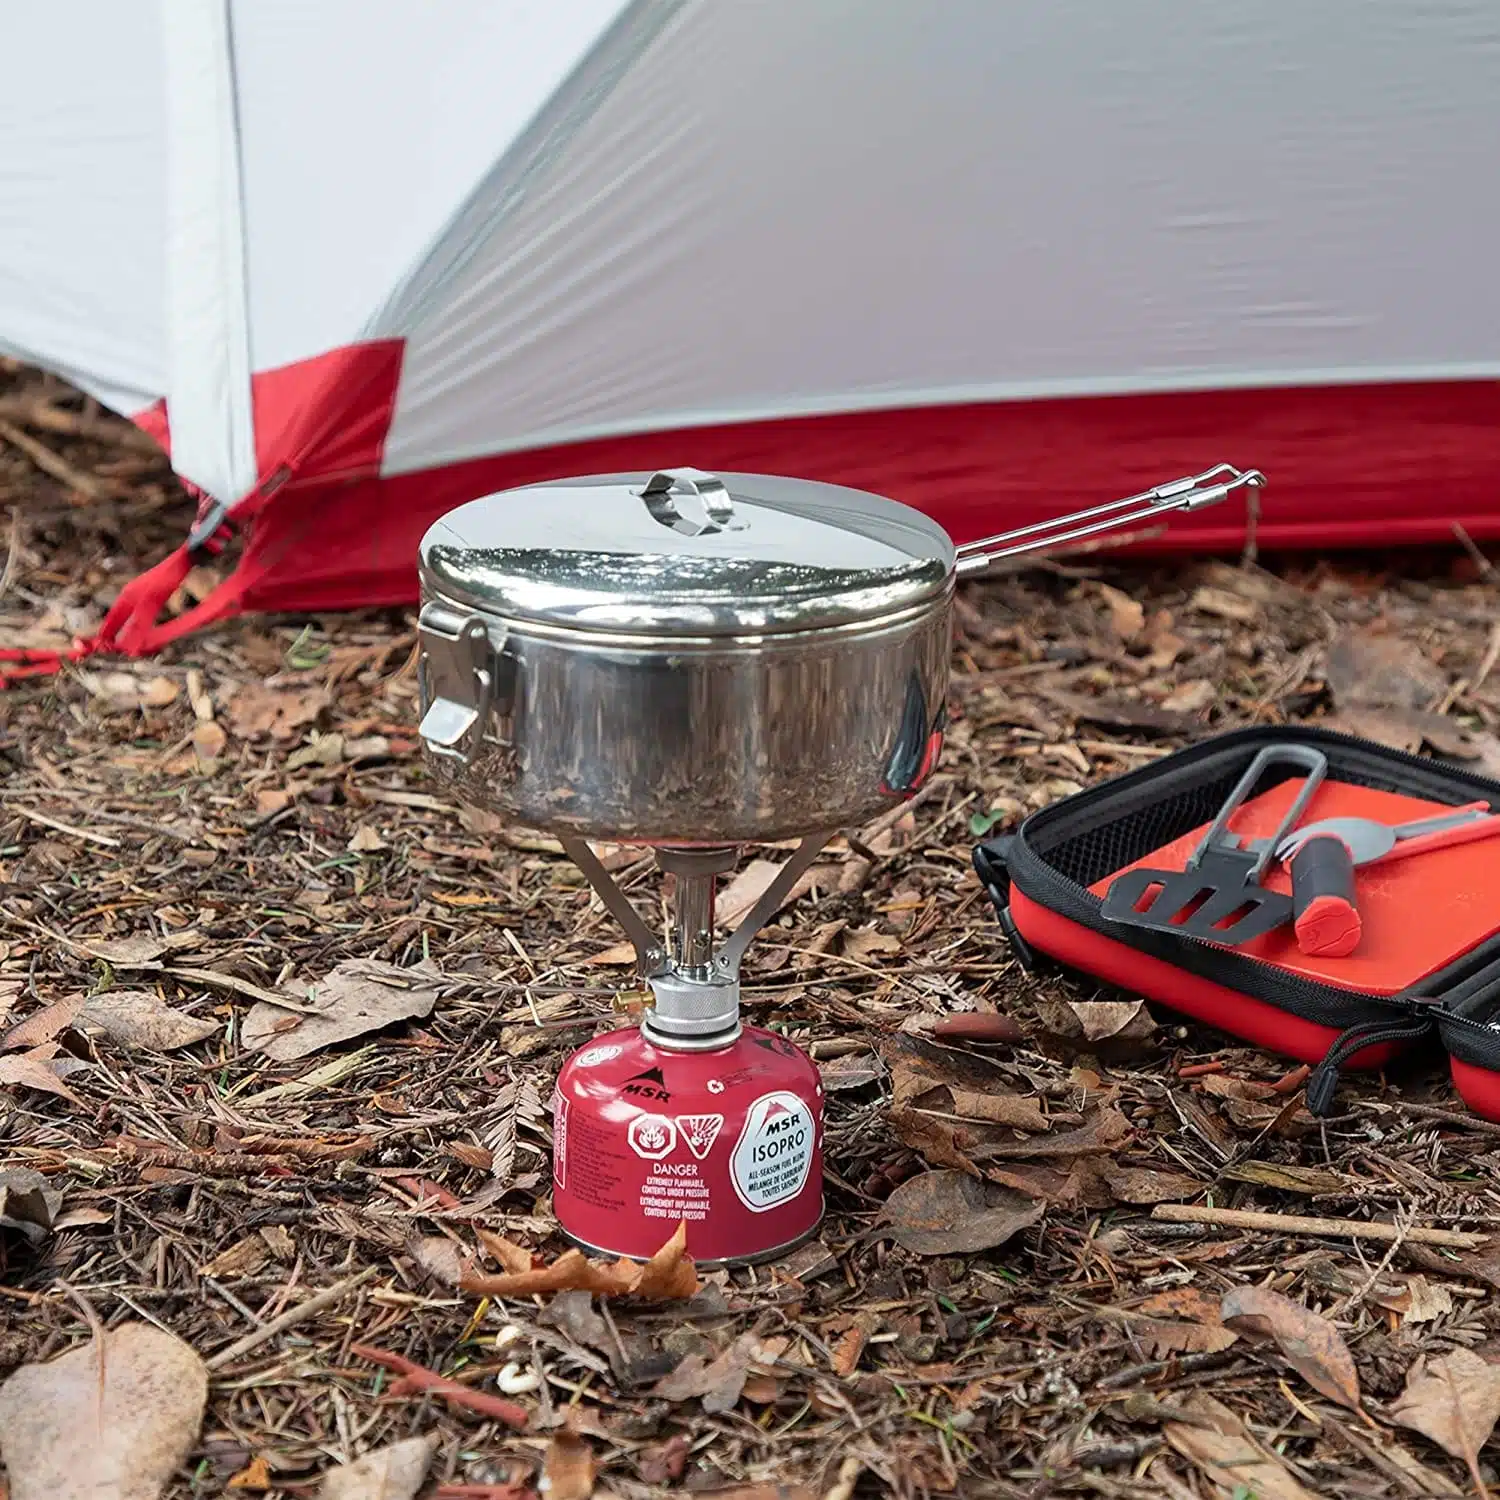 MSR Alpine Stainless Stowaway Camping Pot for boiling water